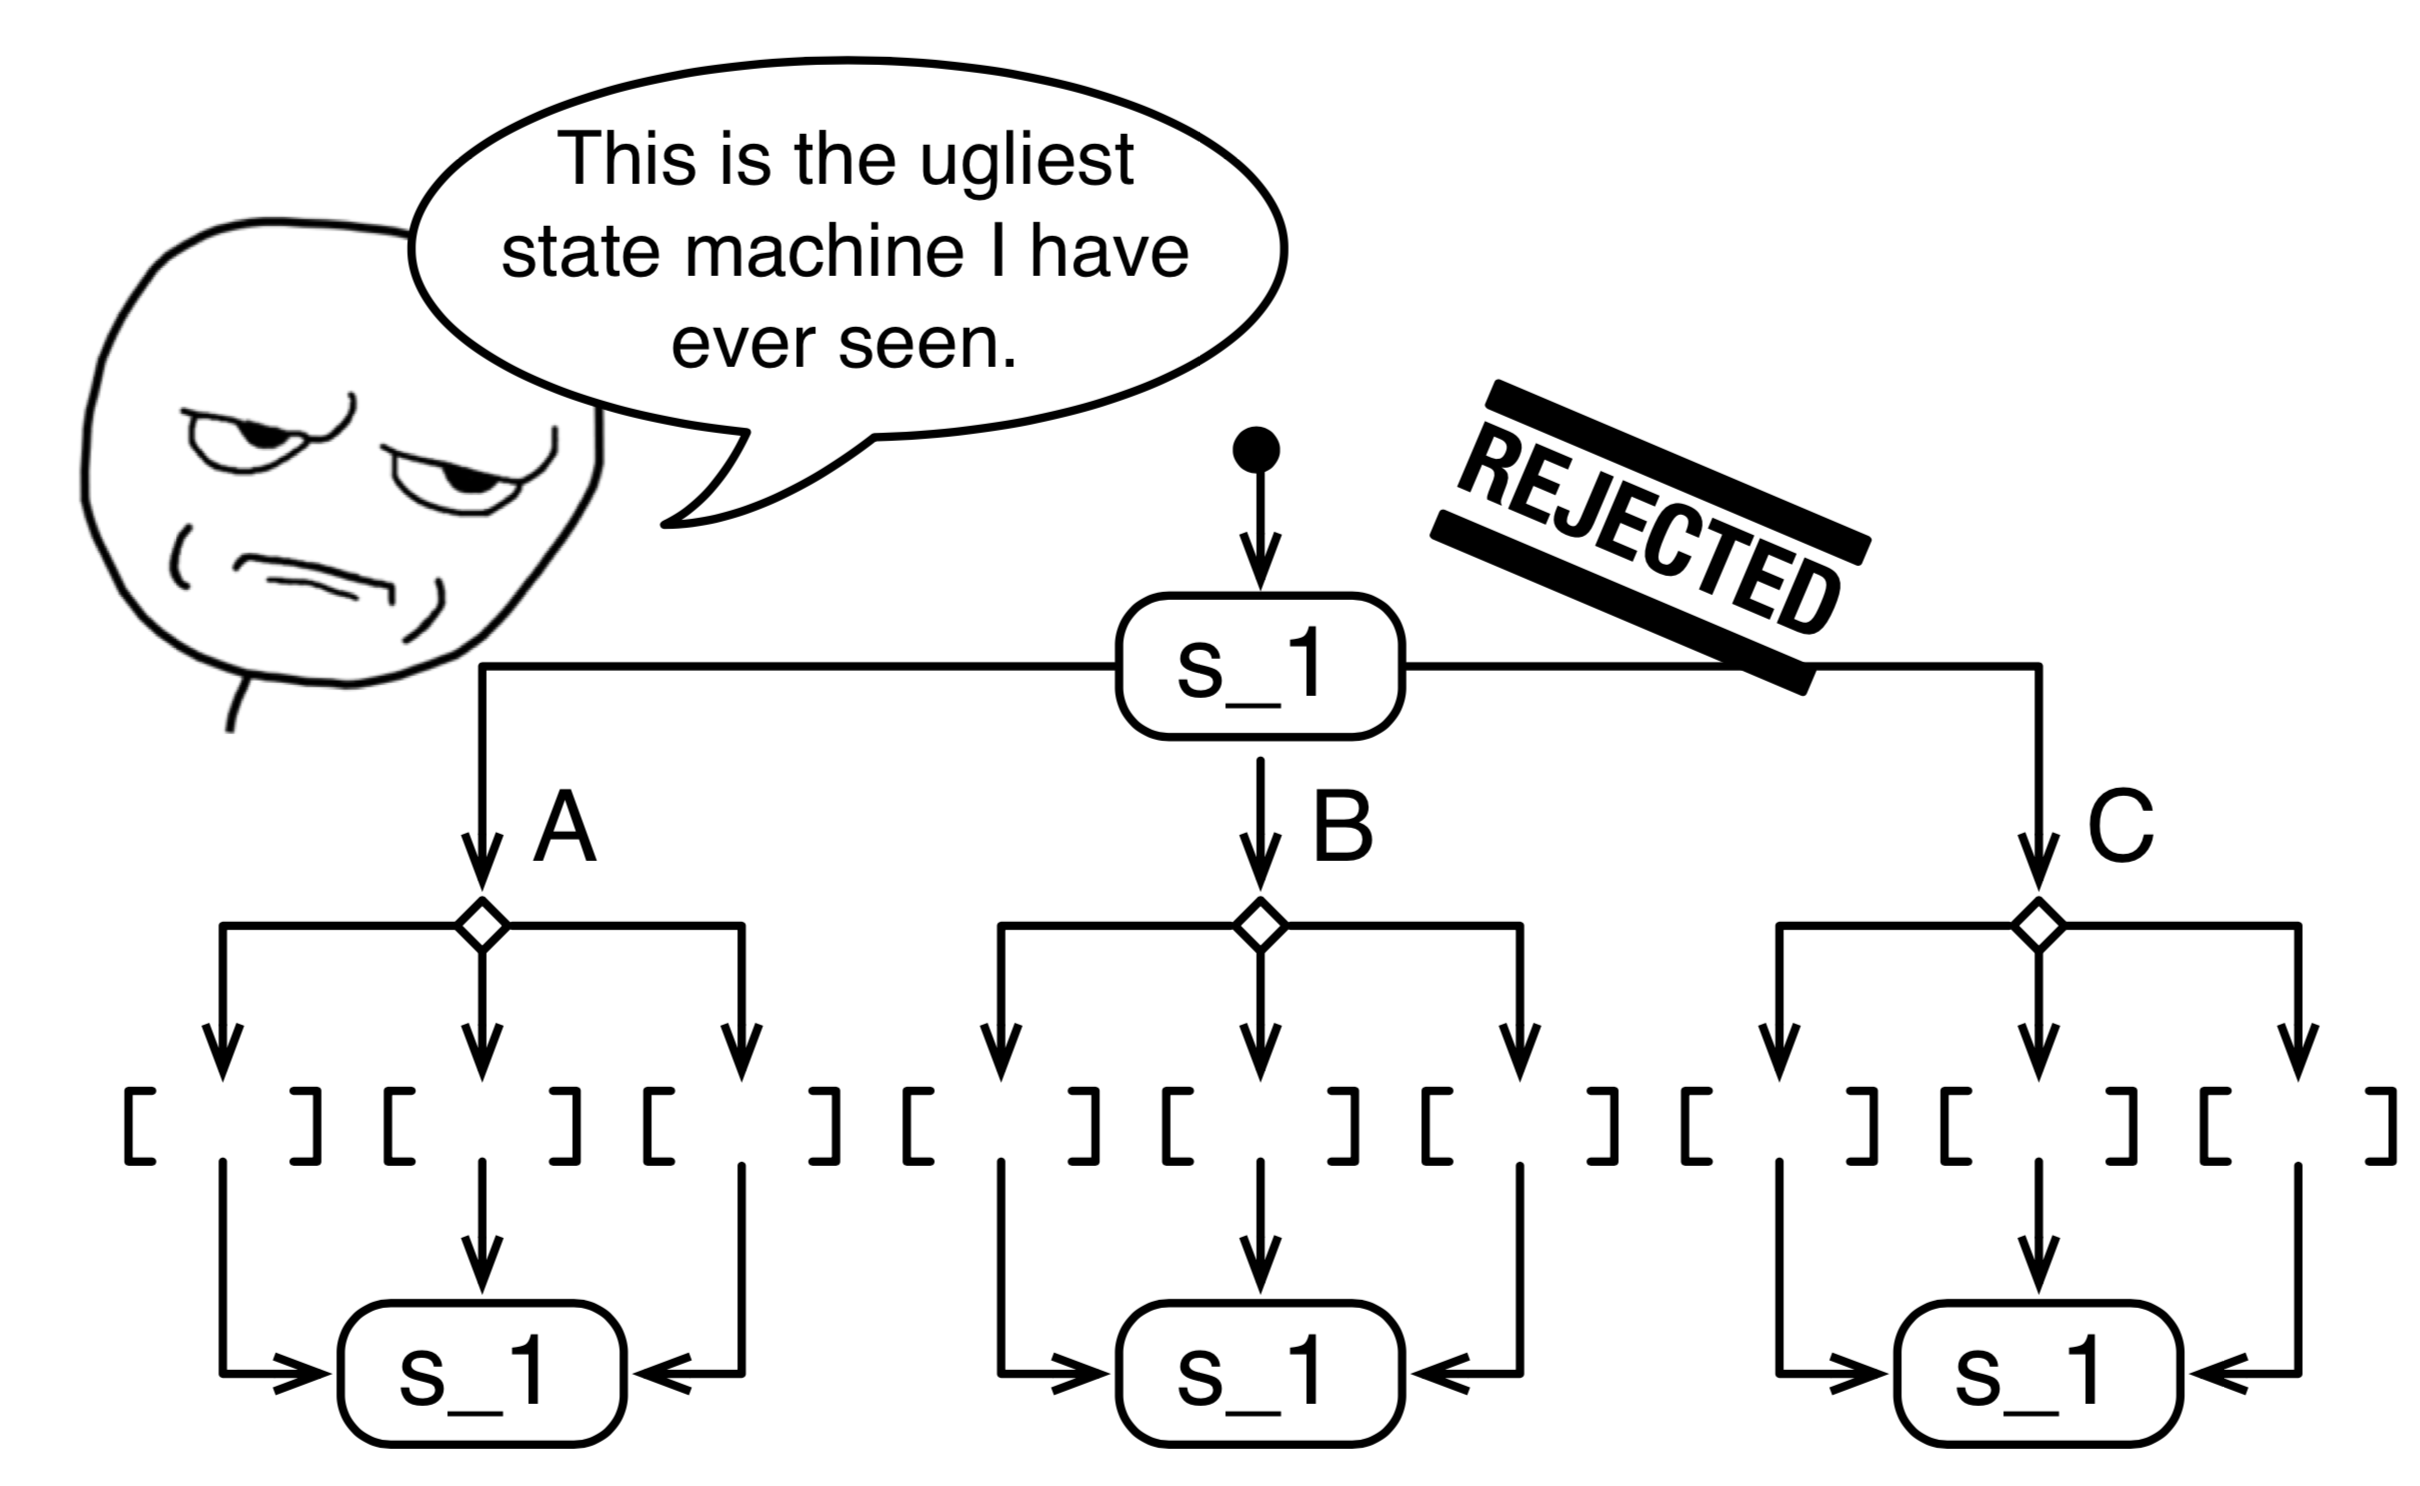 A state machine with only a single state. Possible, syntactically correct, and also completely useless. Not recommended.